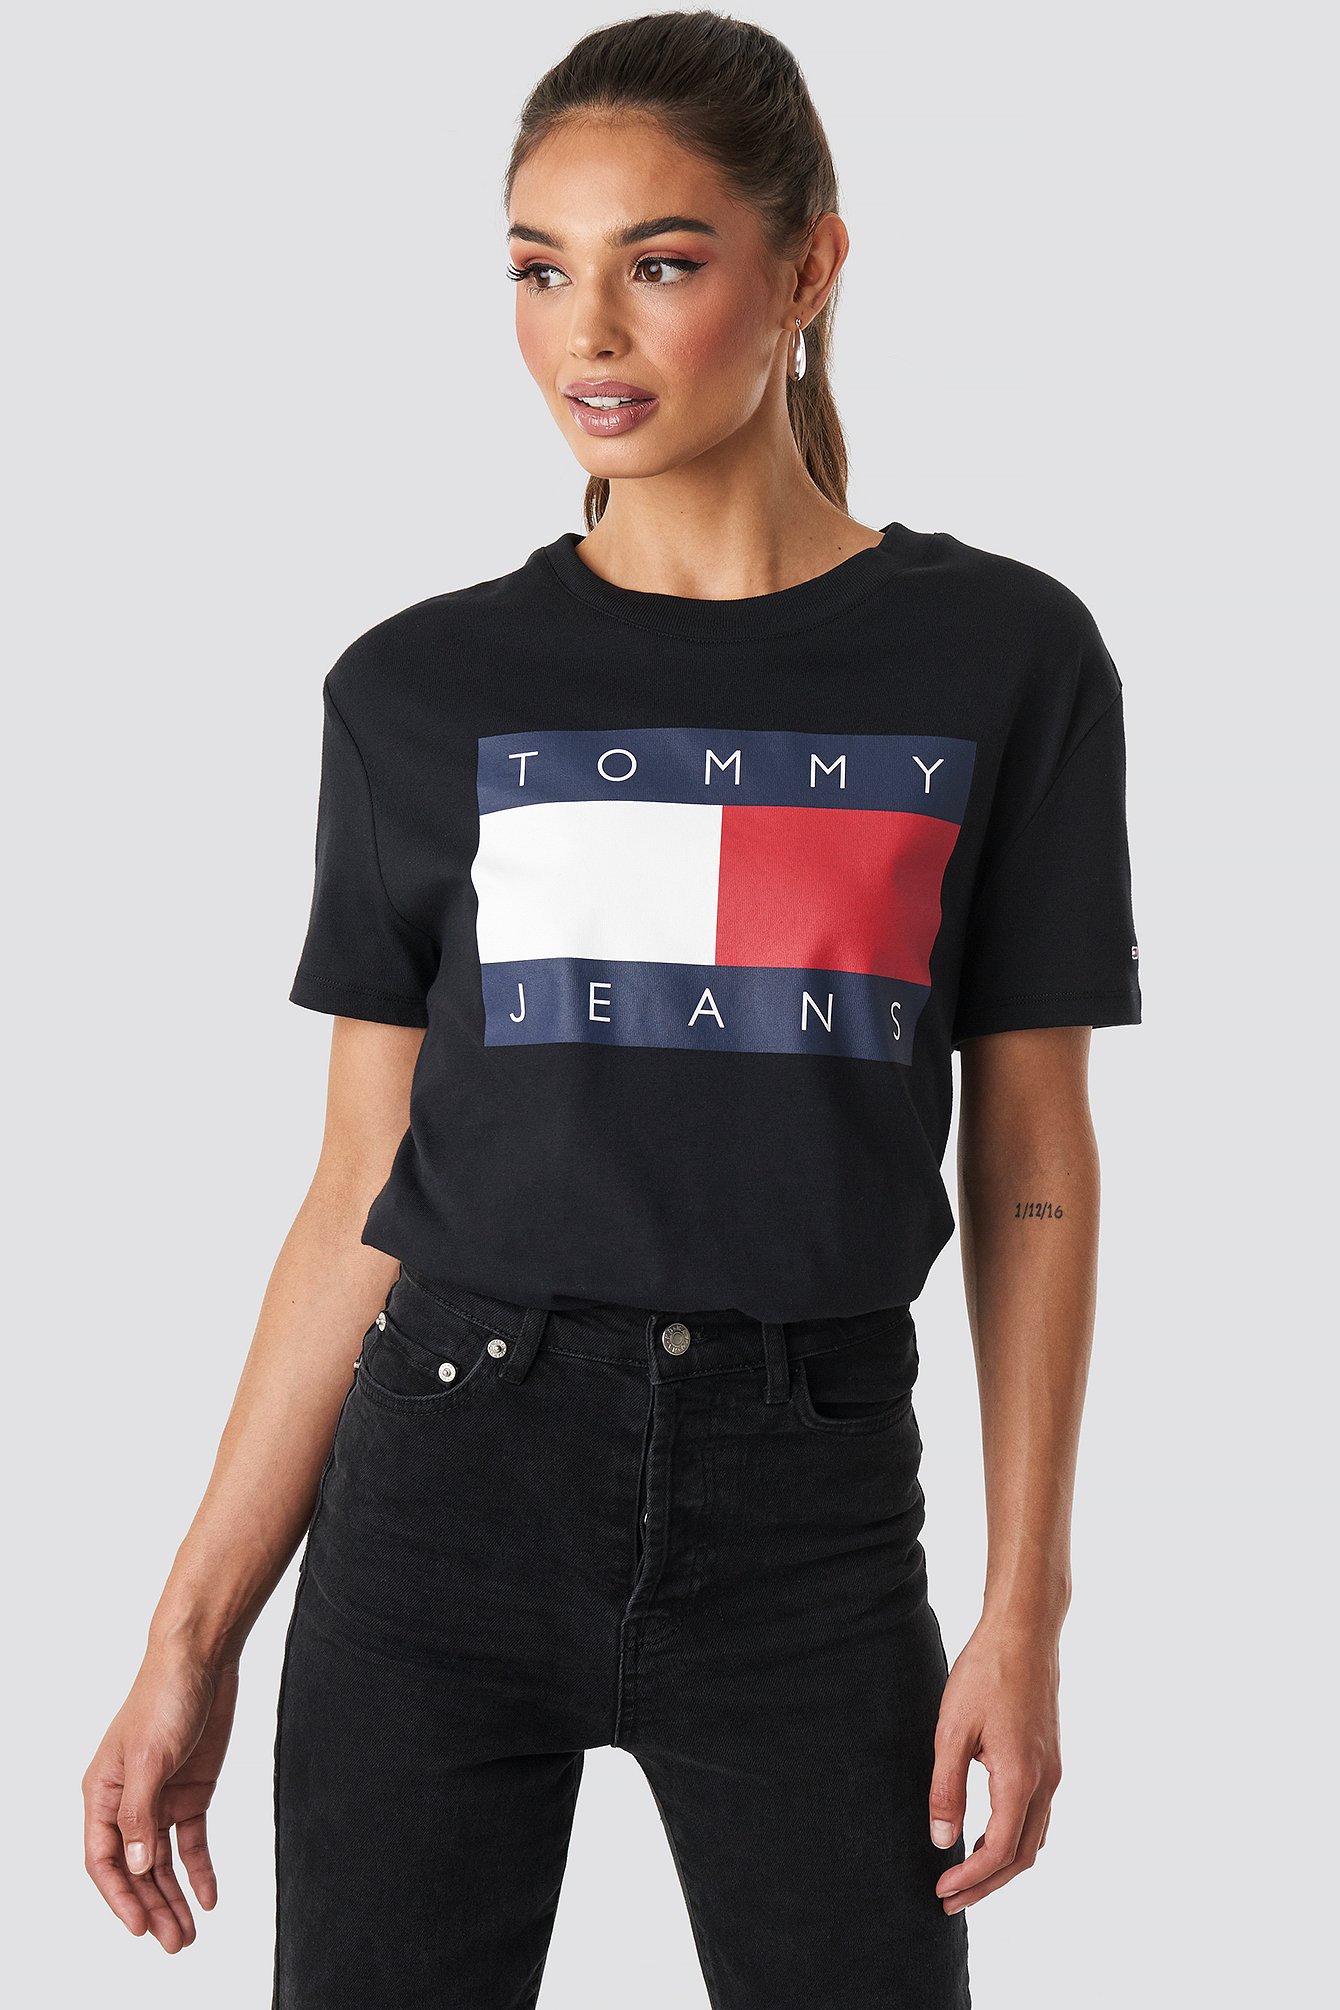 tommy jeans flag tee